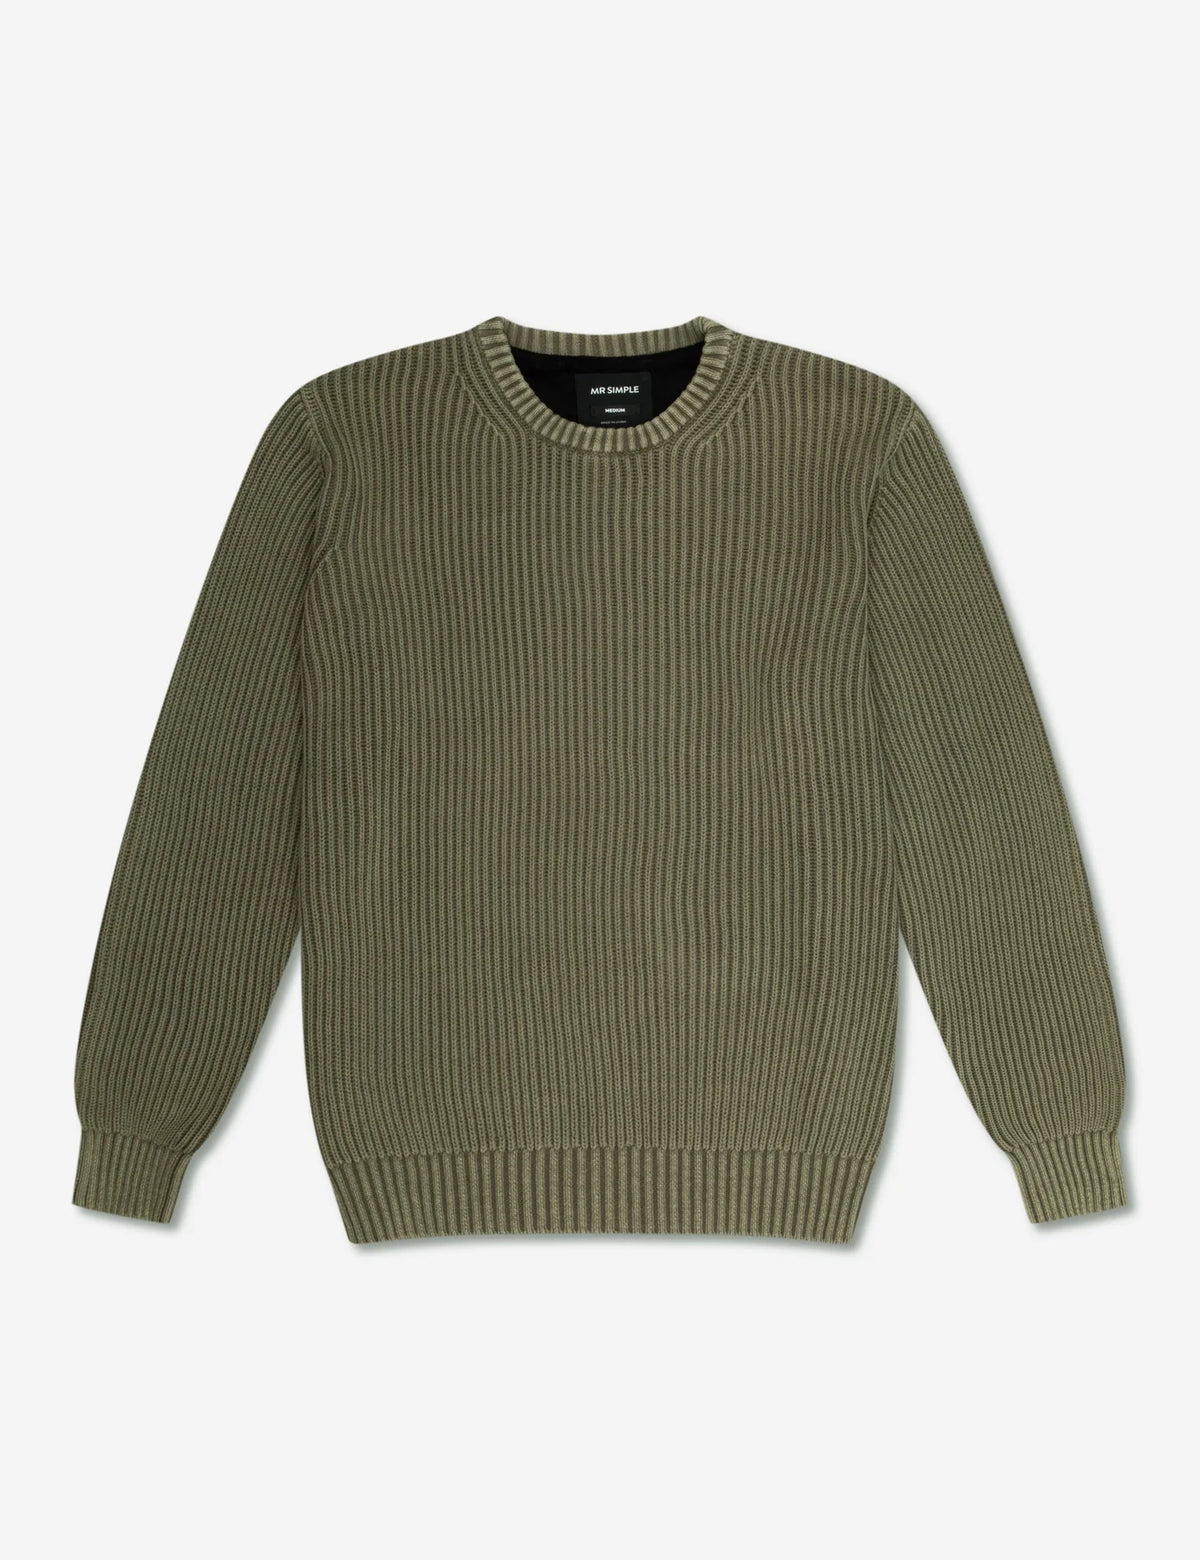 Mr Simple - Fisher Chunky Organic Knit Fatigue Green